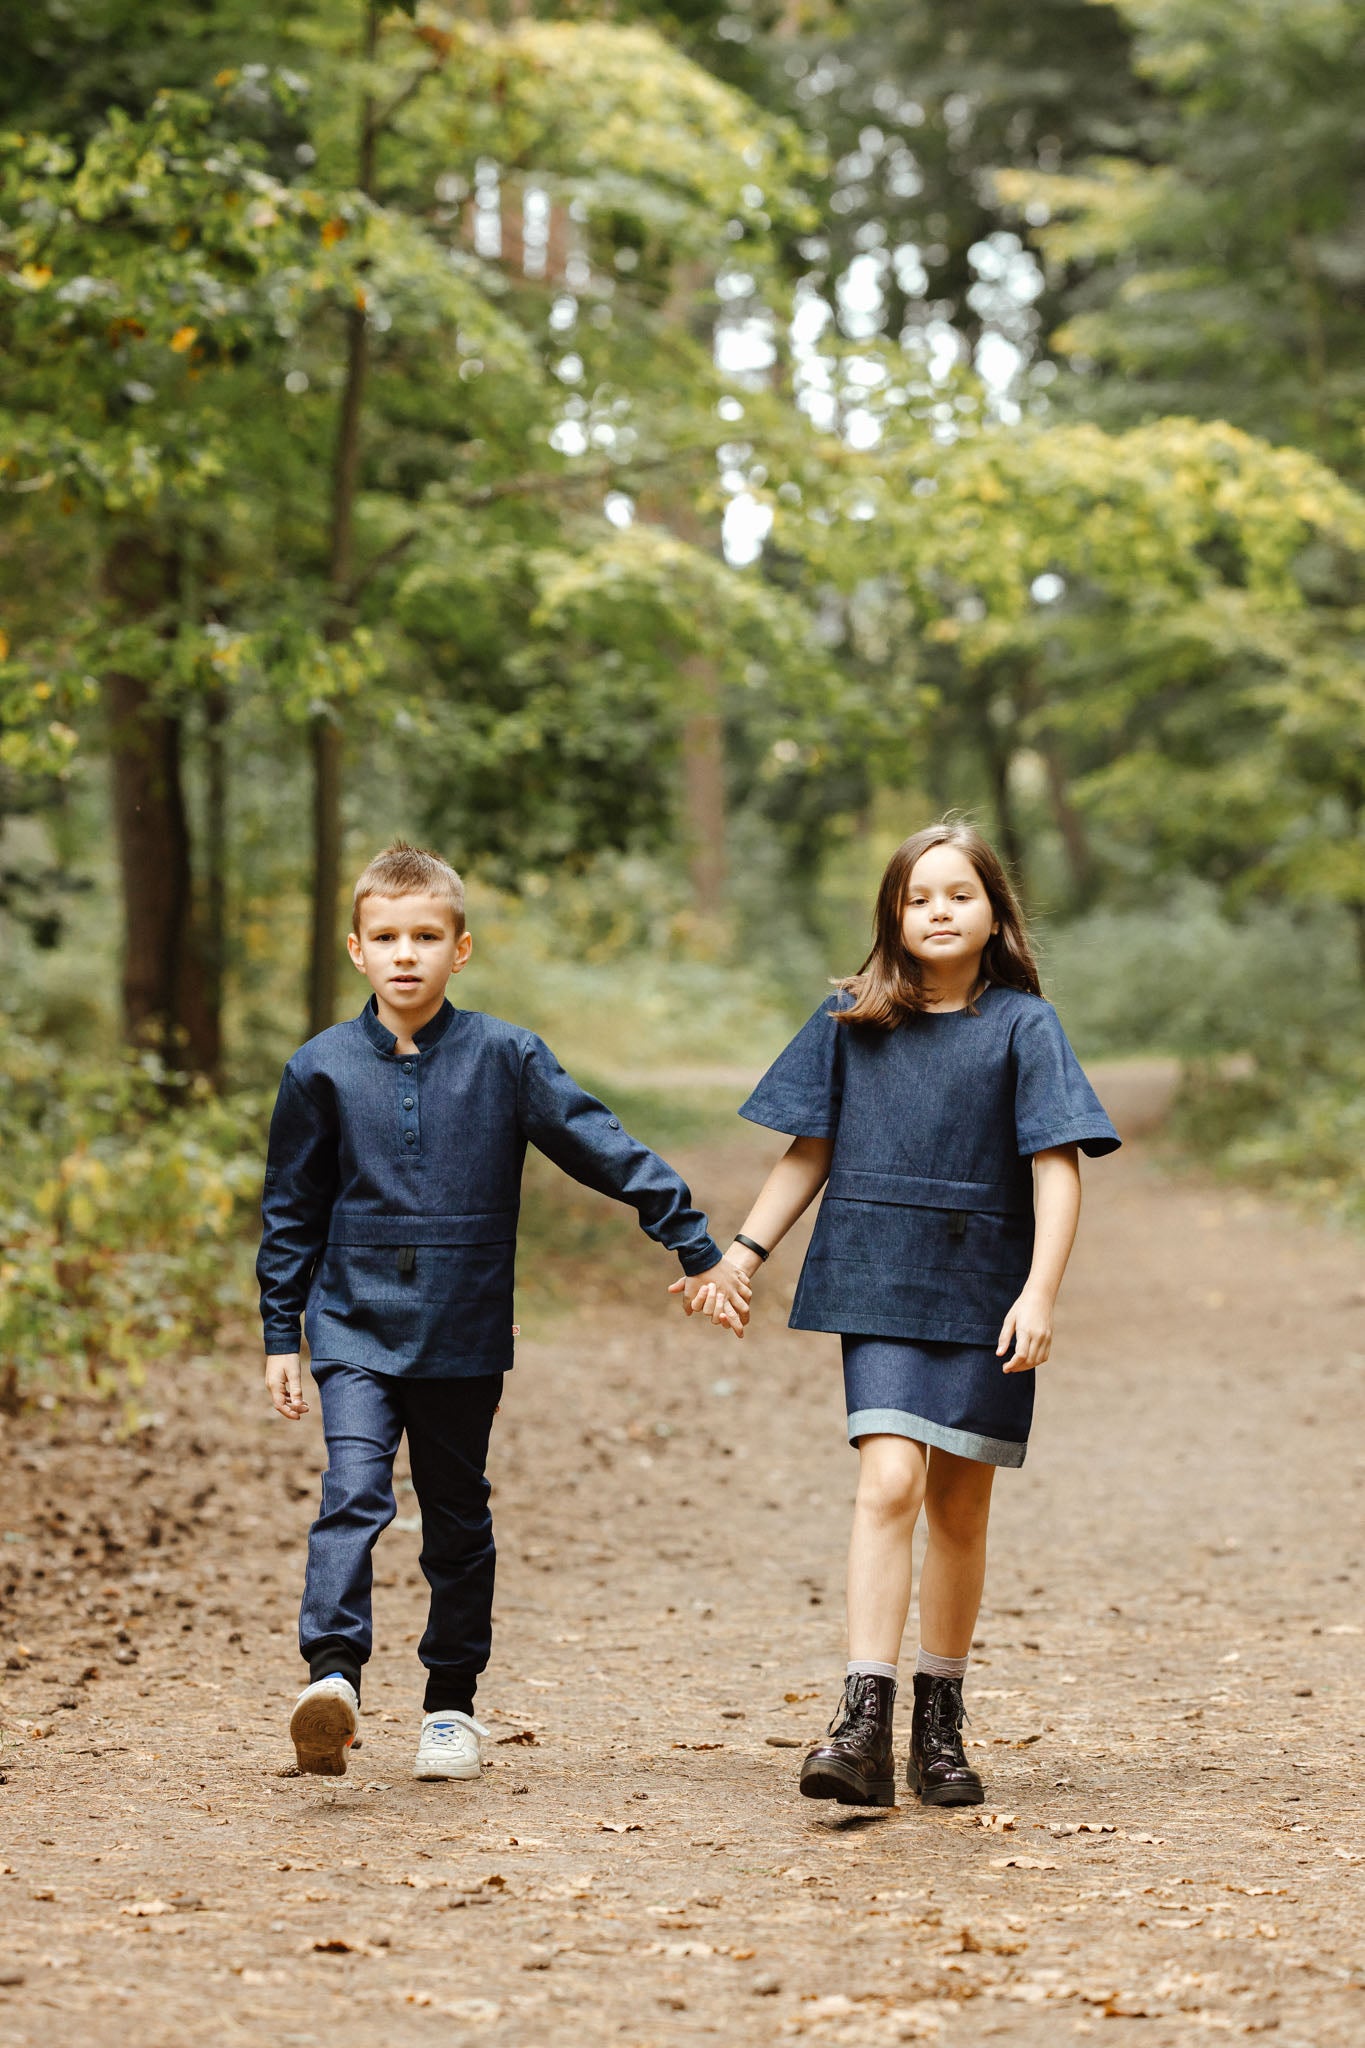 Type 1 Diabetes Clothing - Kids with dark clothes with pockets  | Our Pocket Hero